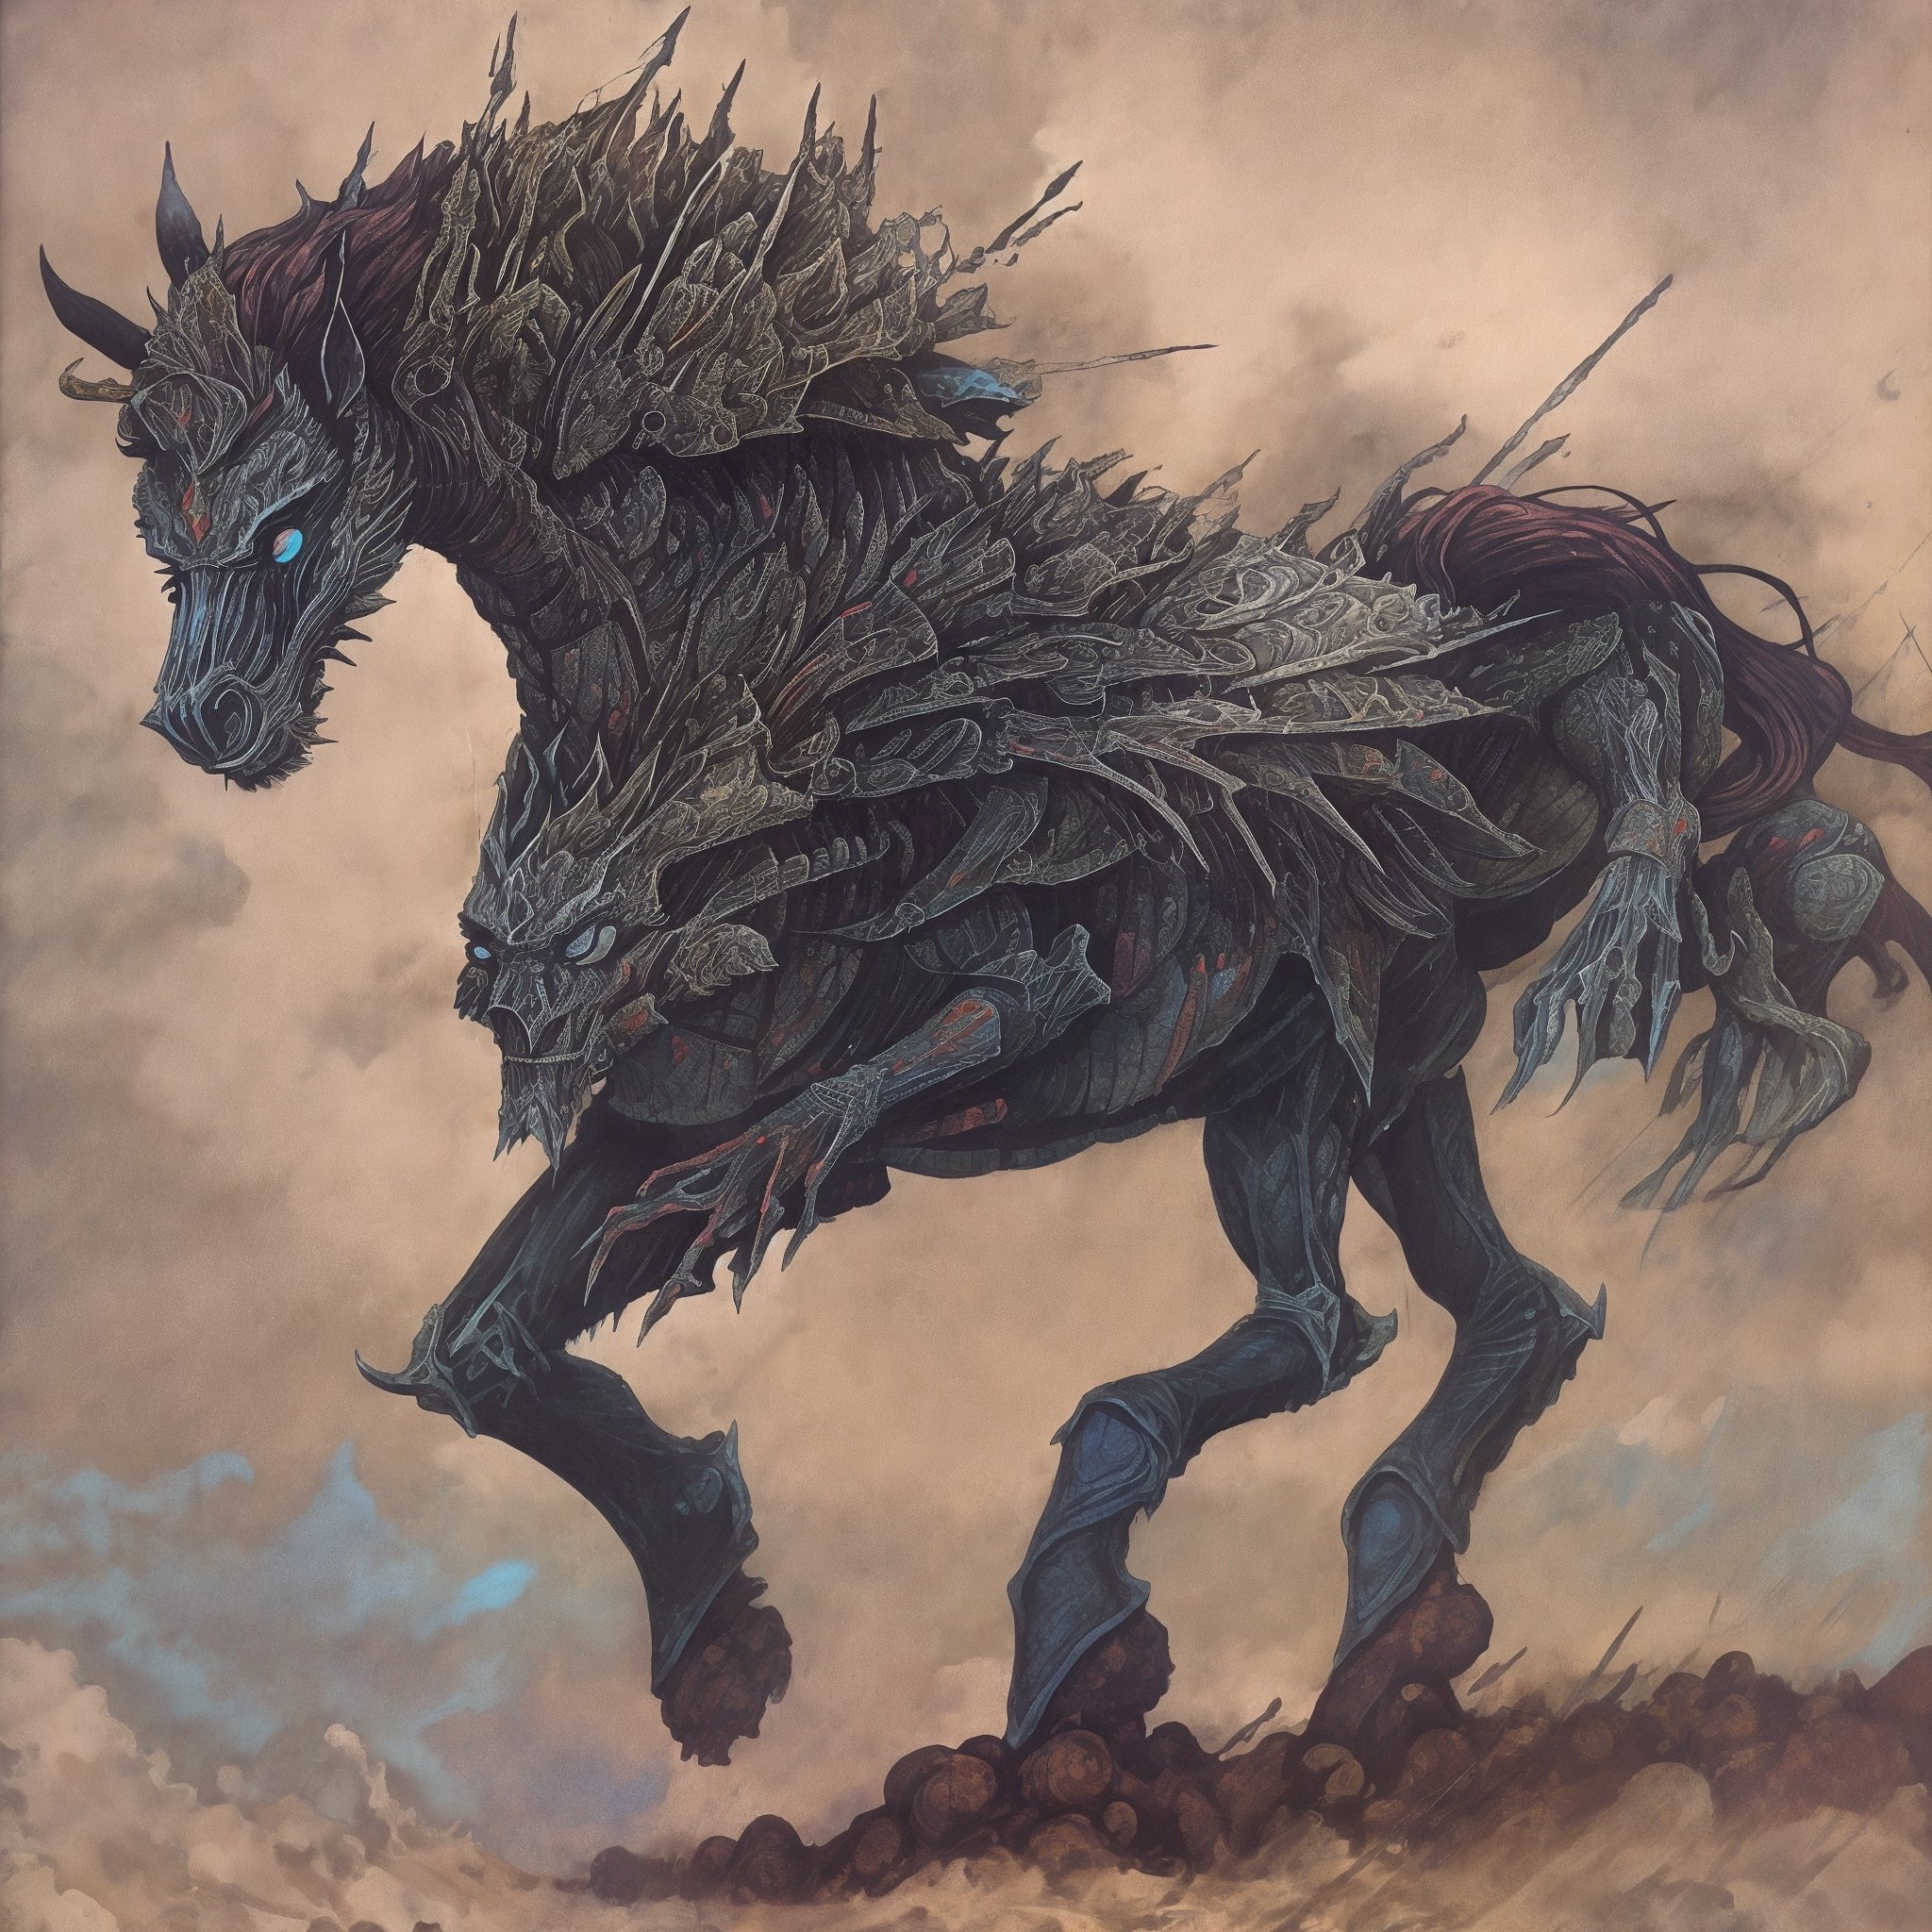 horse in armour, biomechanical monster